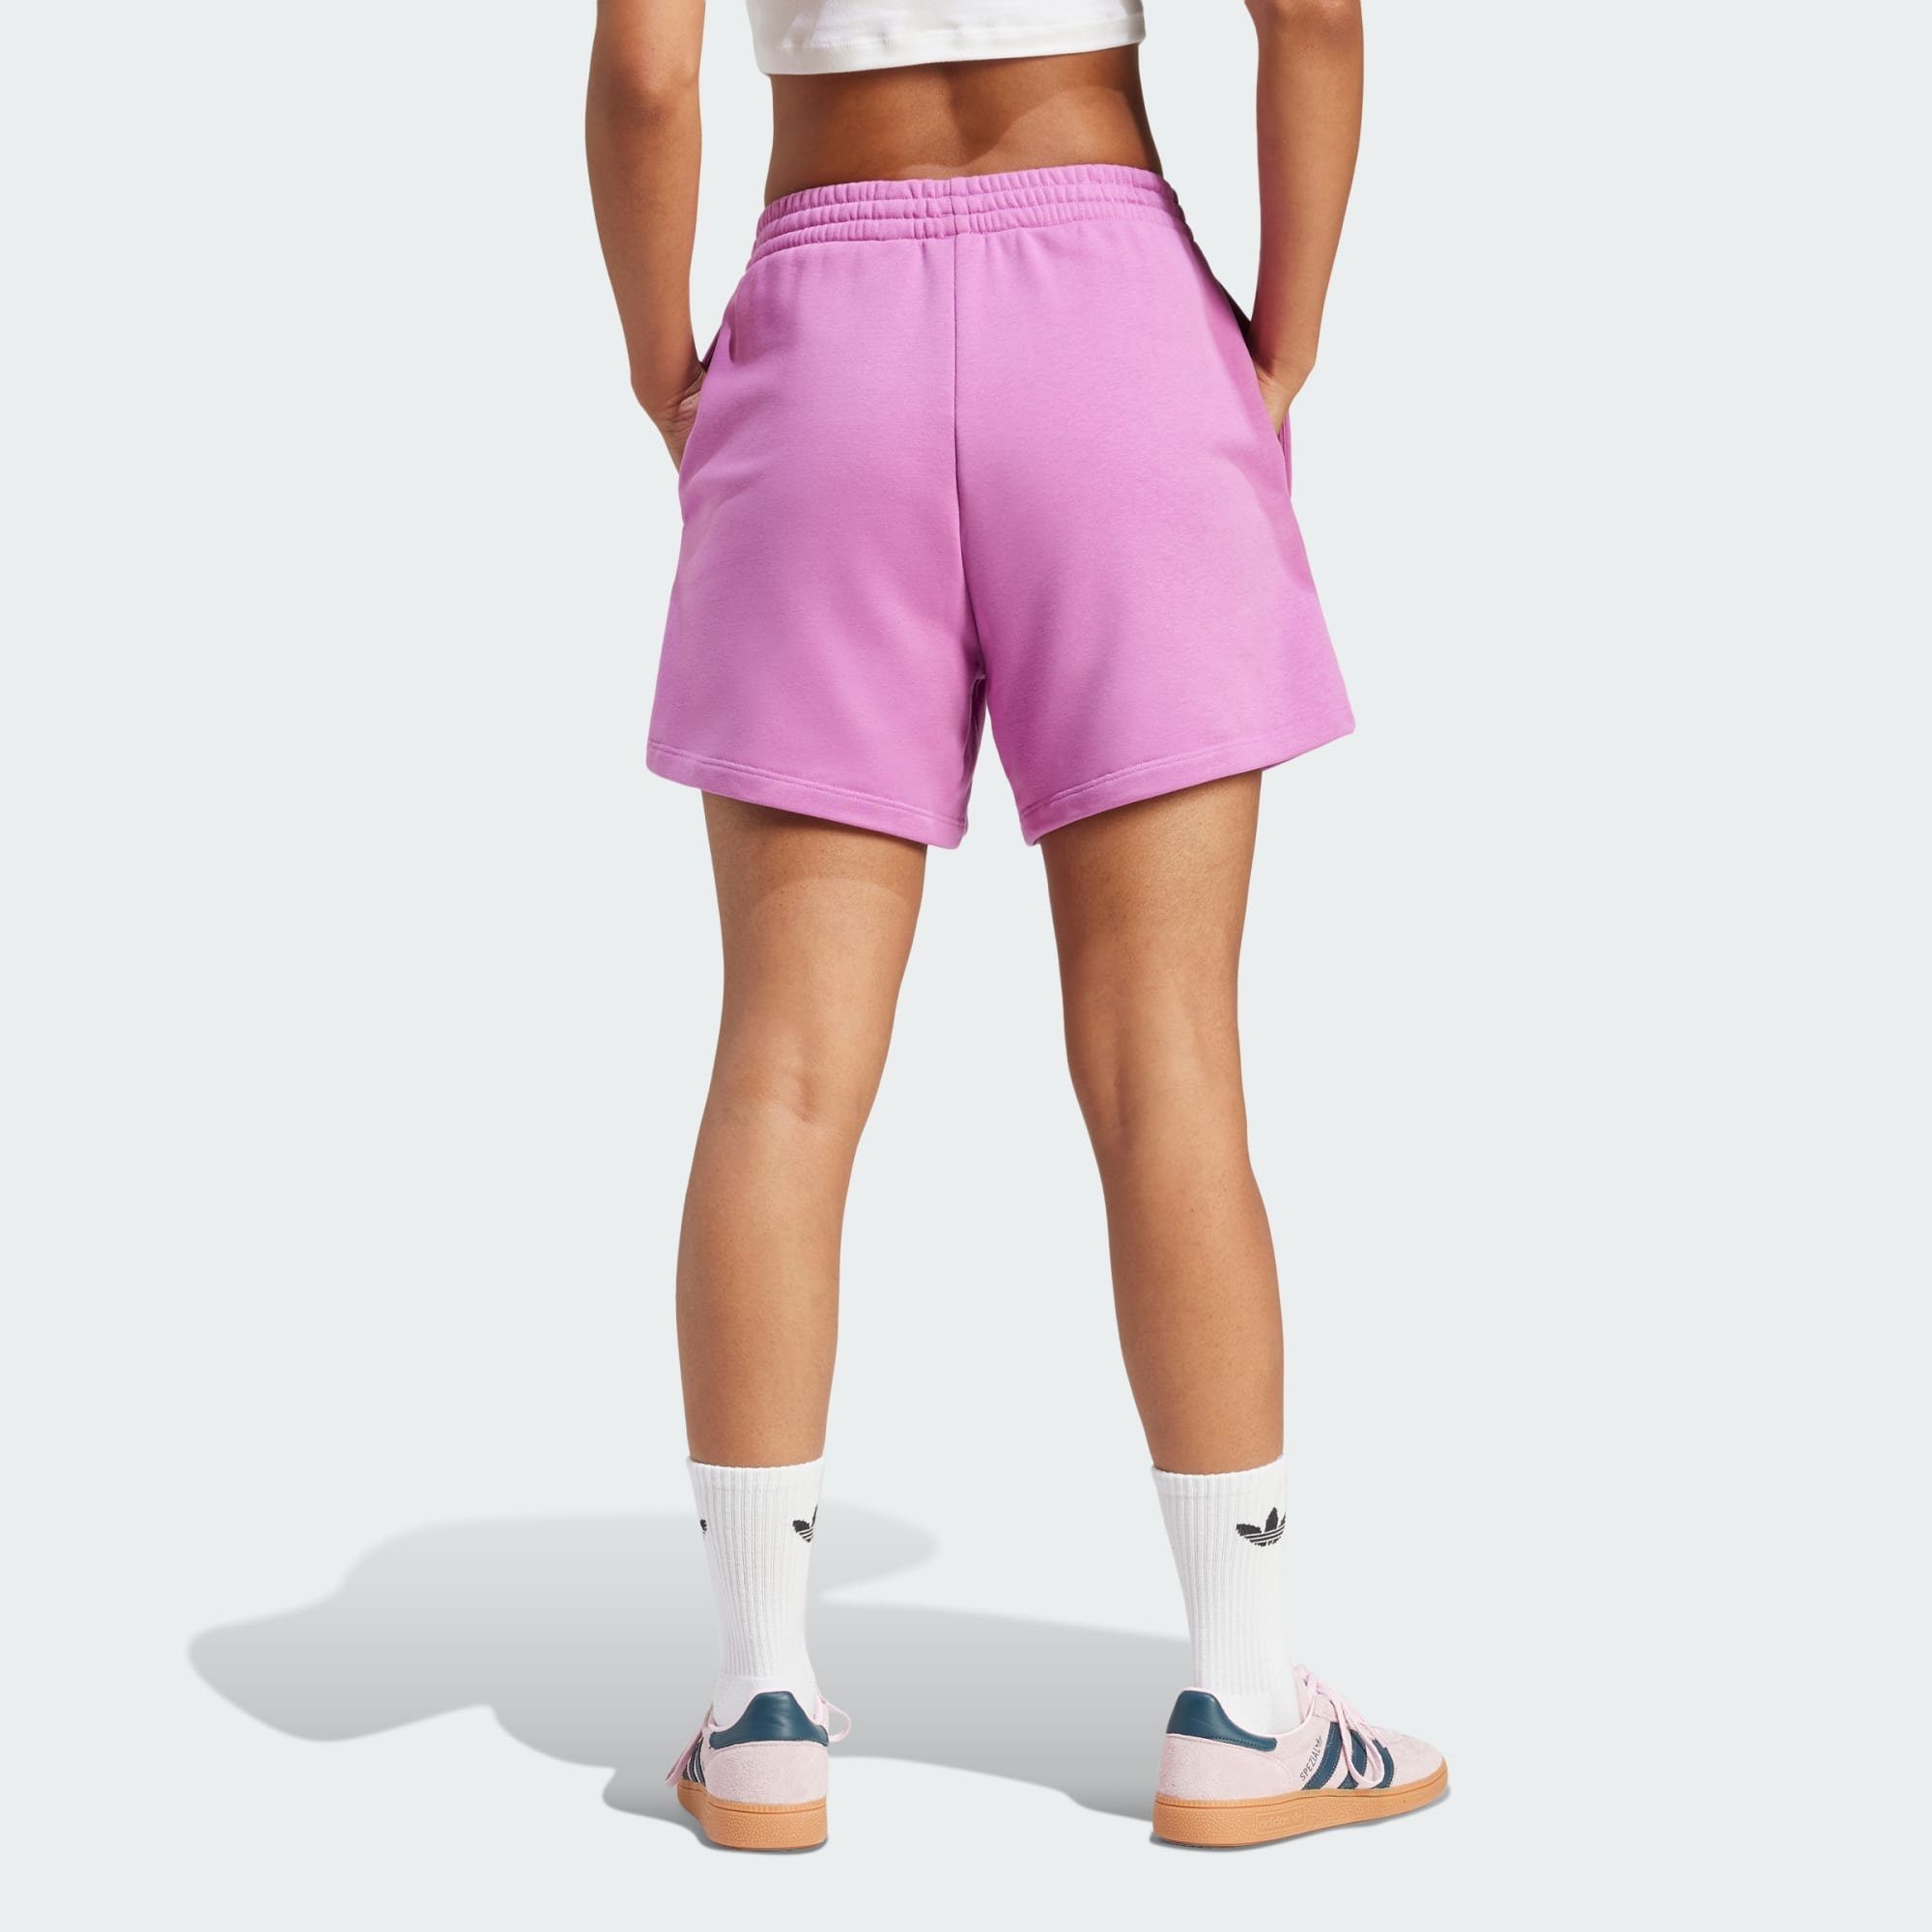 SHORTS Funktionsshorts adidas Originals Pink TERRY ADICOLOR ESSENTIALS FRENCH